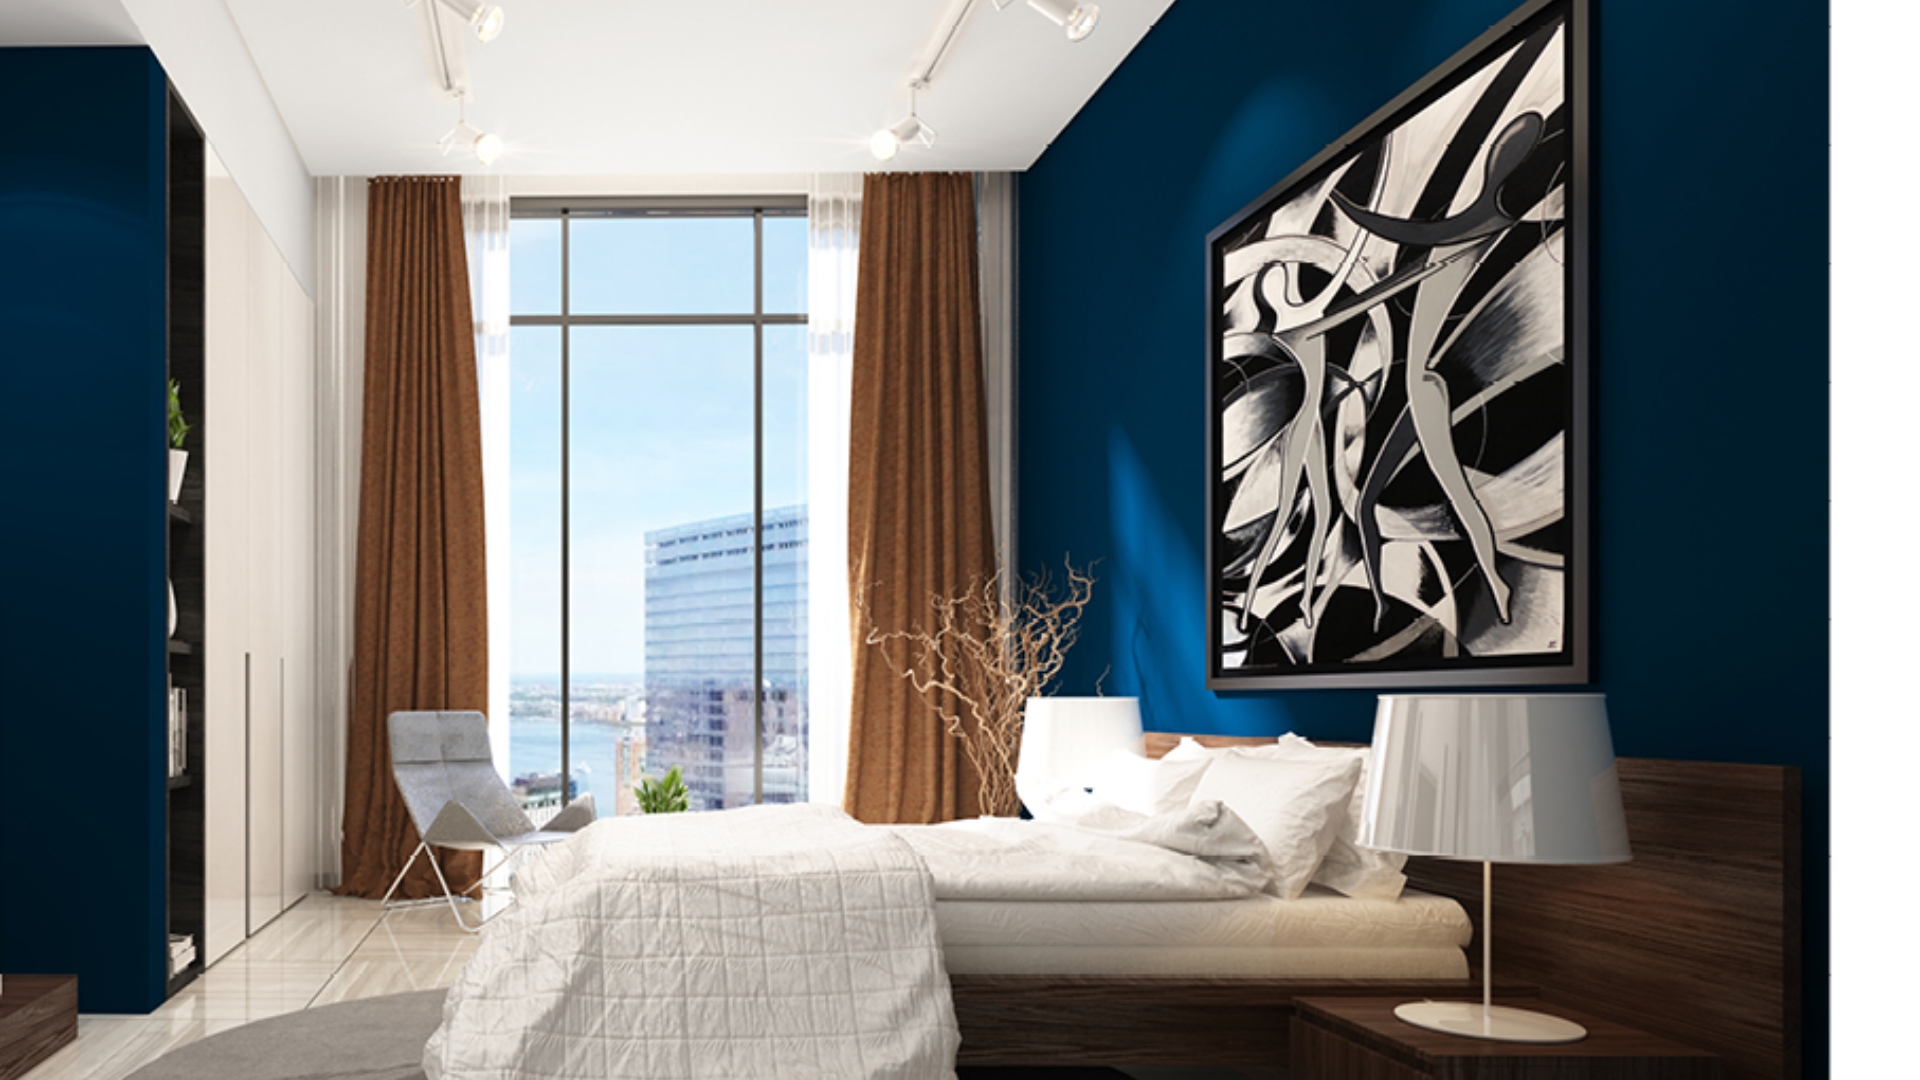 Studio Bedroom Apartment For Sale O2 Tower Lp08009 2e380482ea7ace0.png